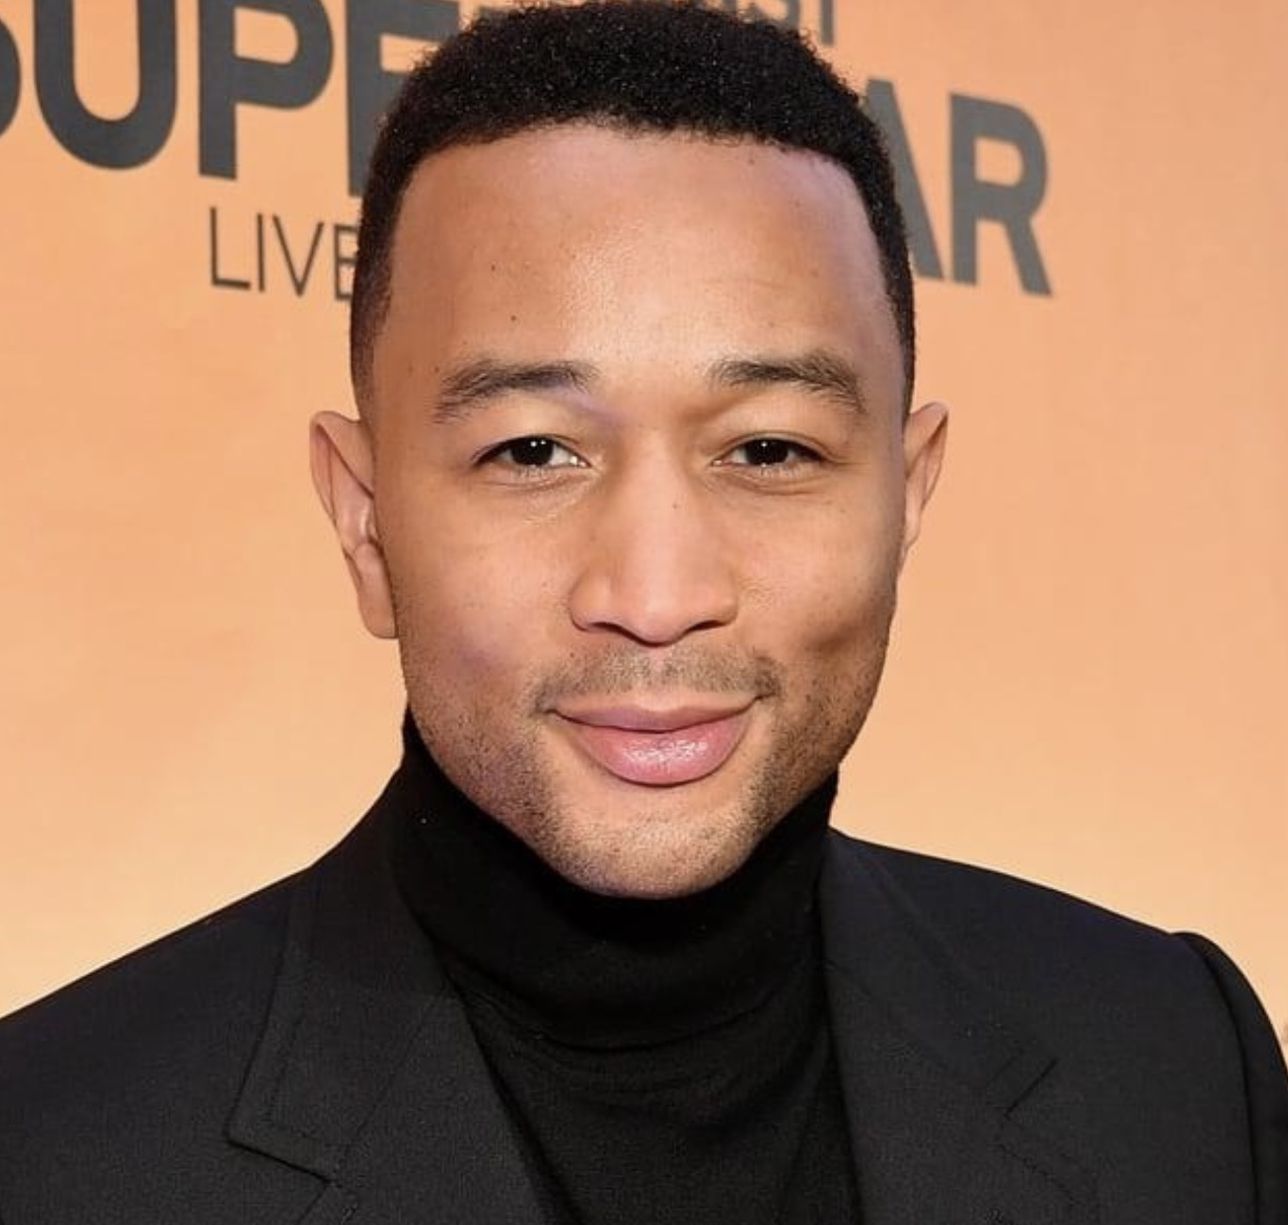 Two John Legend Wolf Trap Lawn Seats- Sold out 6/2 show